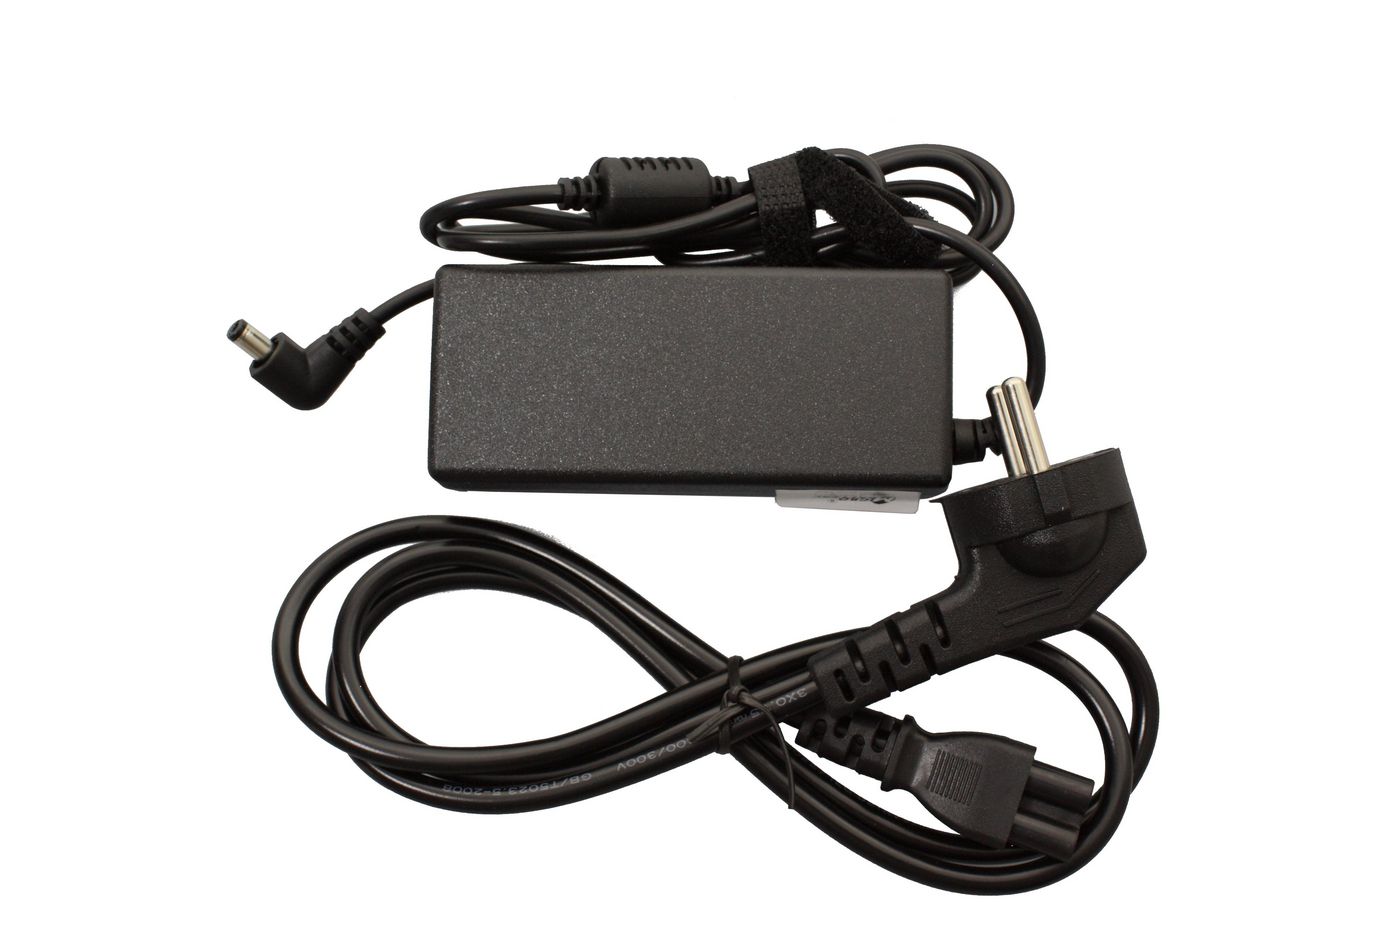 CoreParts MBA1245 Power Adapter for Linksys 